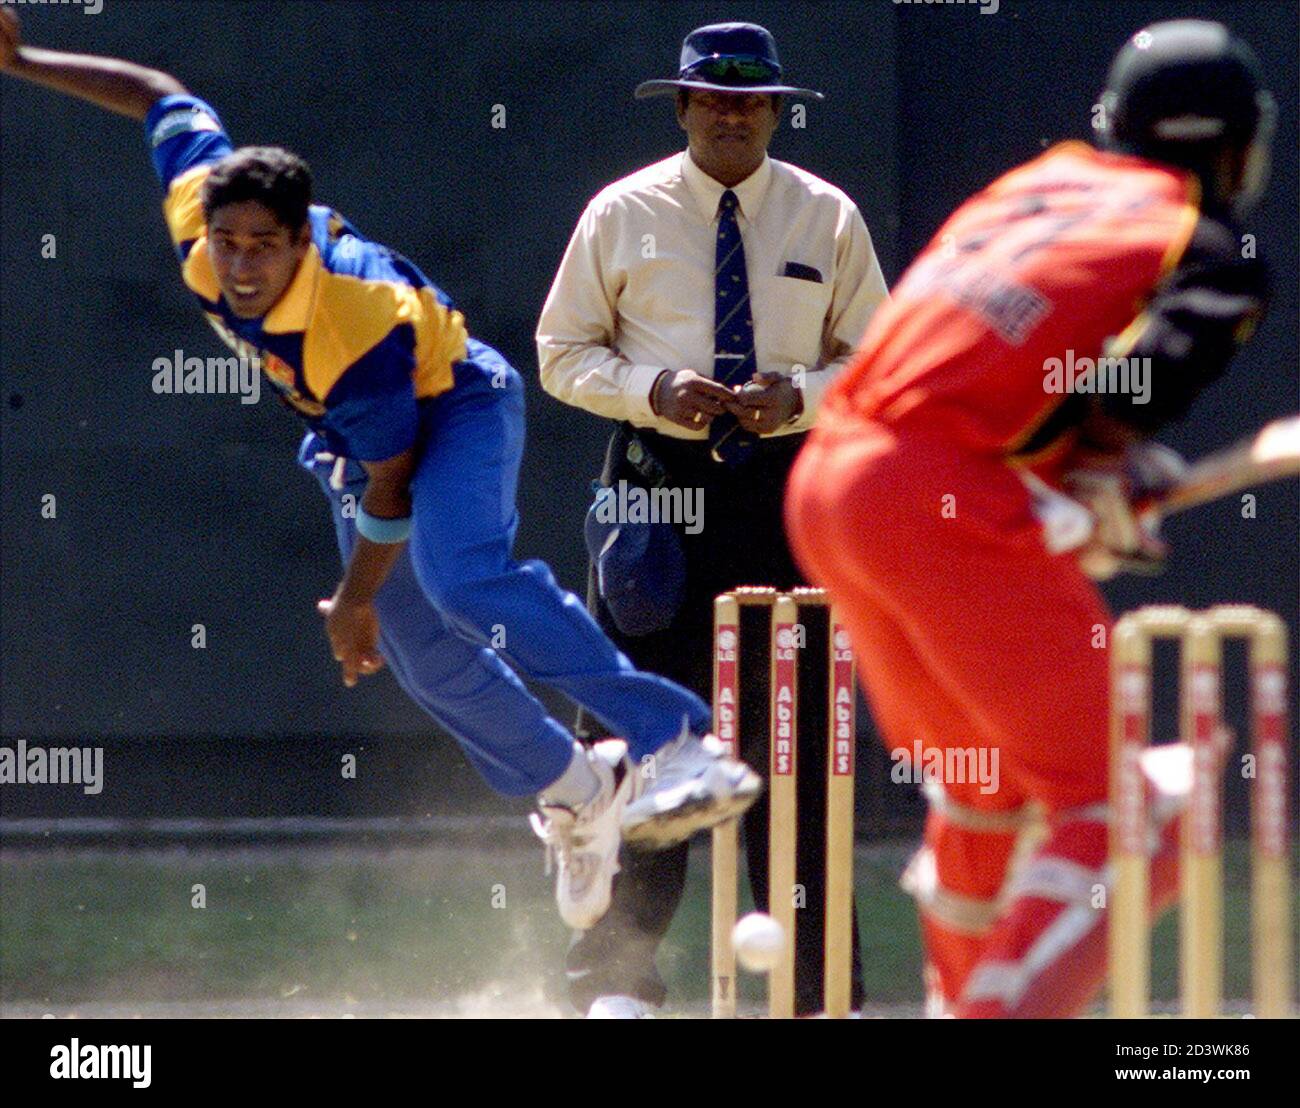 Sri Lankan fast bowler Chaminda Vaas (L) bowls to Zimbabwe batsman Andy Flower (R) as umpire Gamini Silva watches in the curtain raiser of the LG triangular tournament at Sinhalese Sports Club ground in the Sri Lankan capital Colombo on December 8, 2001. Vaas created a new world record by capturing eight wickets for 19 runs as the visitors were bowled out for 38 runs. Sri Lanka won the game by nine wickets. REUTERS/Anuruddha Lokuhapuarachchi  AL/CP Stock Photo